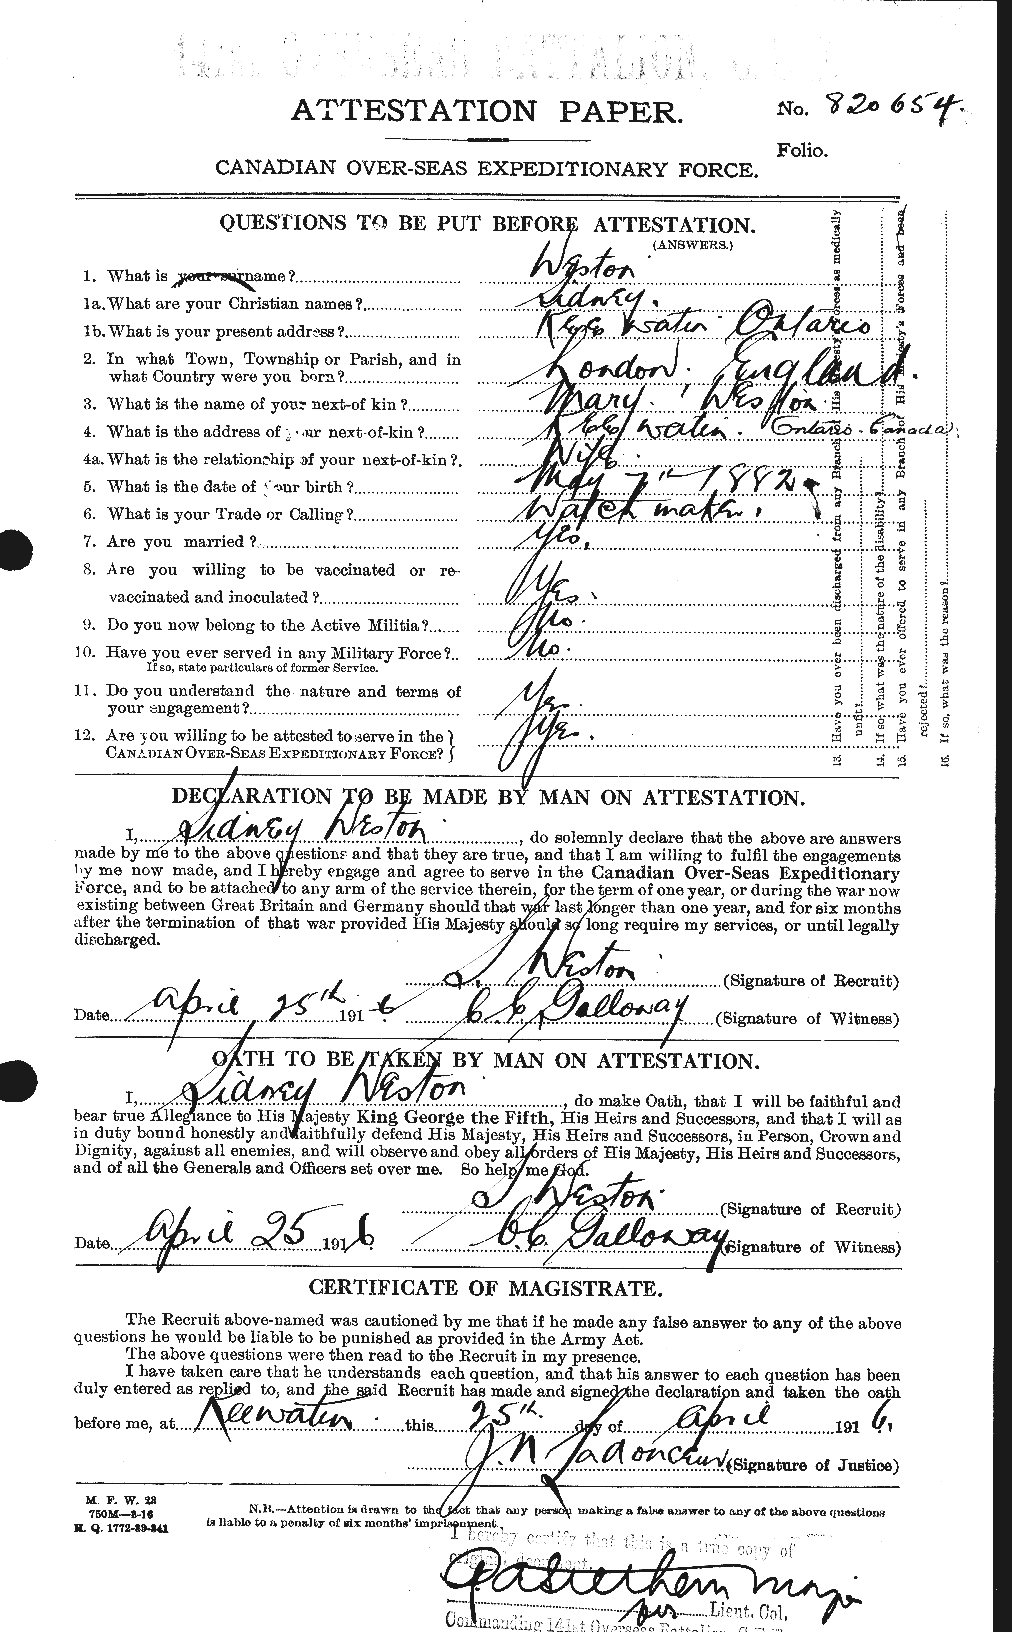 Personnel Records of the First World War - CEF 665803a